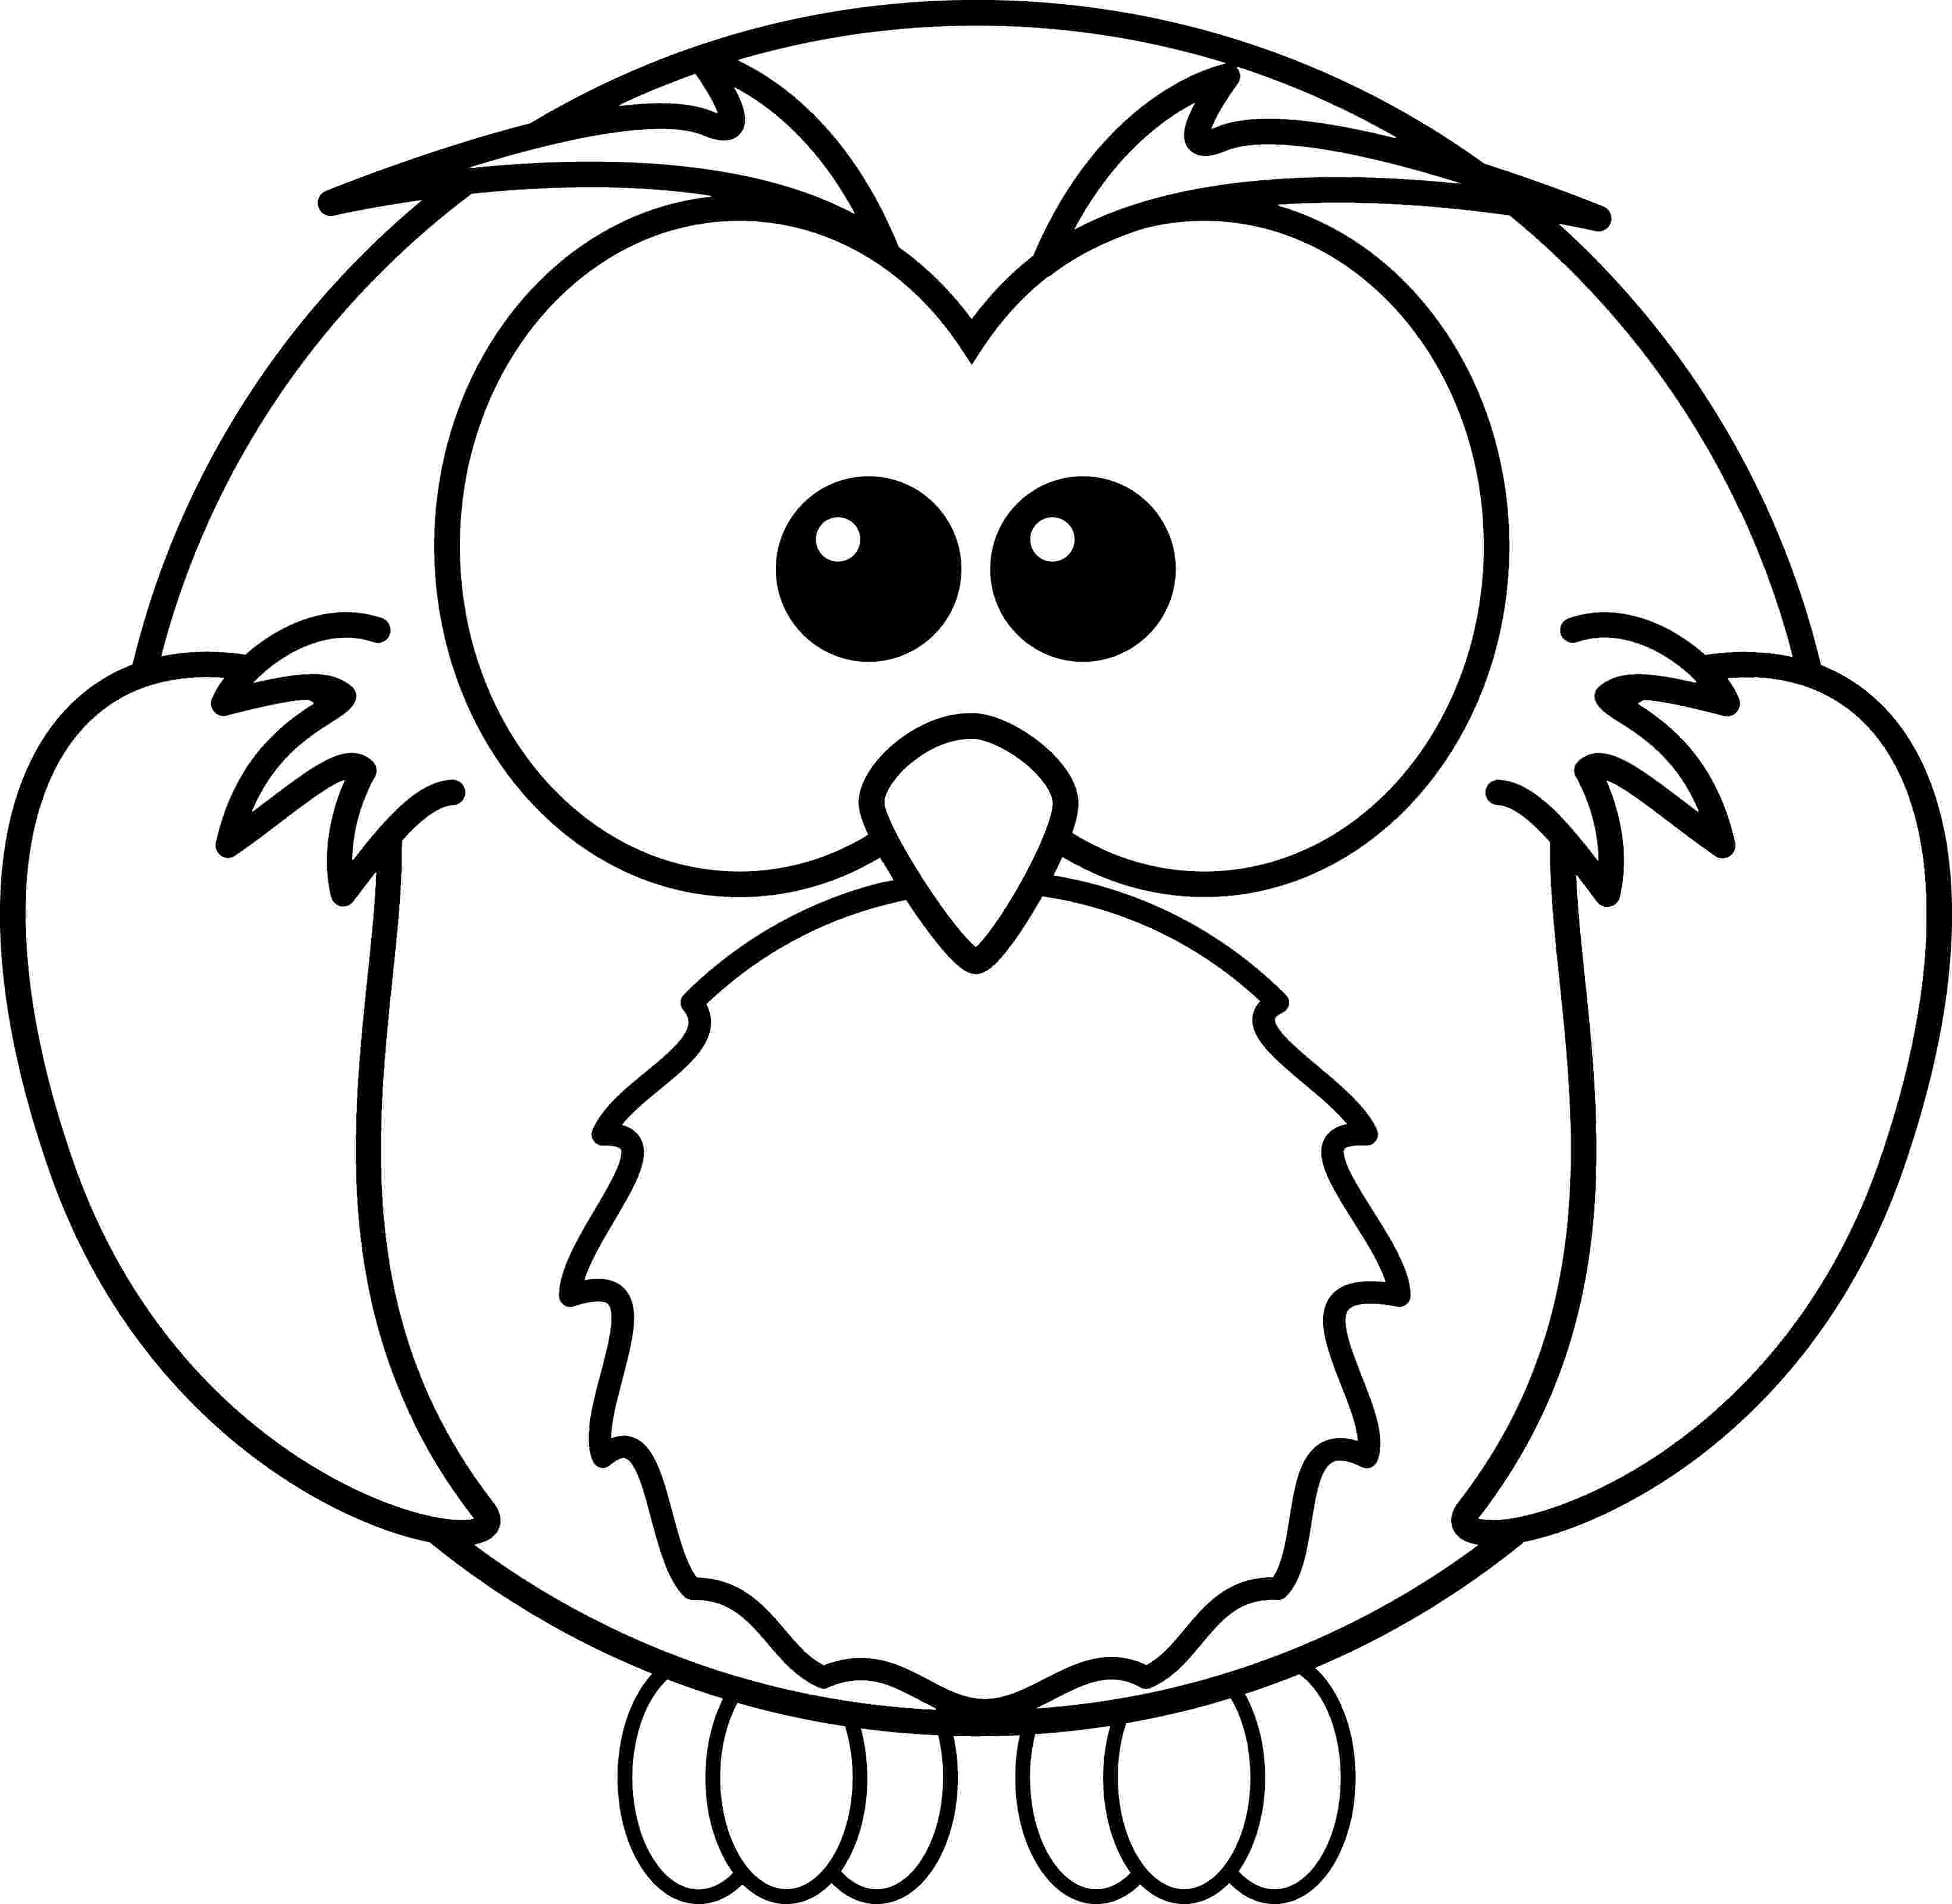 owl coloring pages for kids owl coloring pages for kids coloring home pages for coloring kids owl 